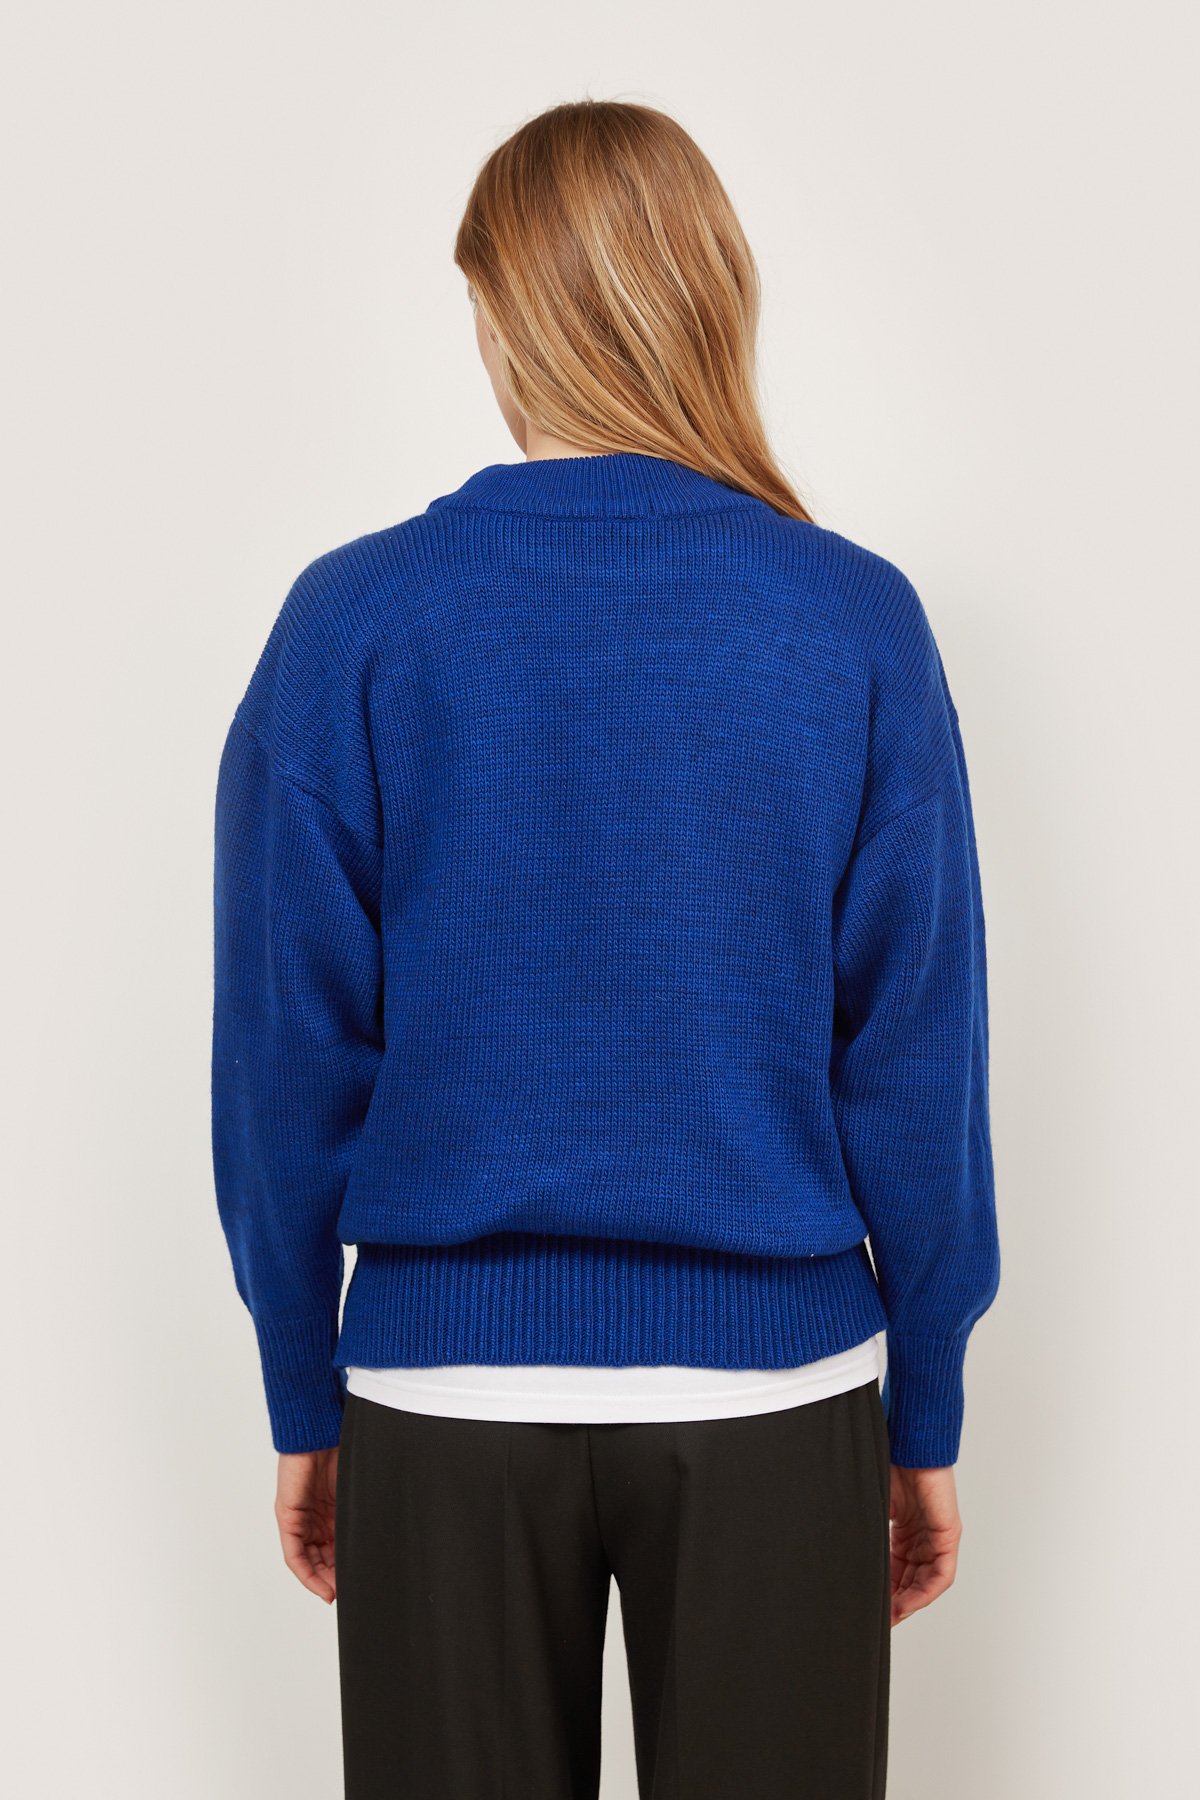 Electric blue knitted sweater, photo 4